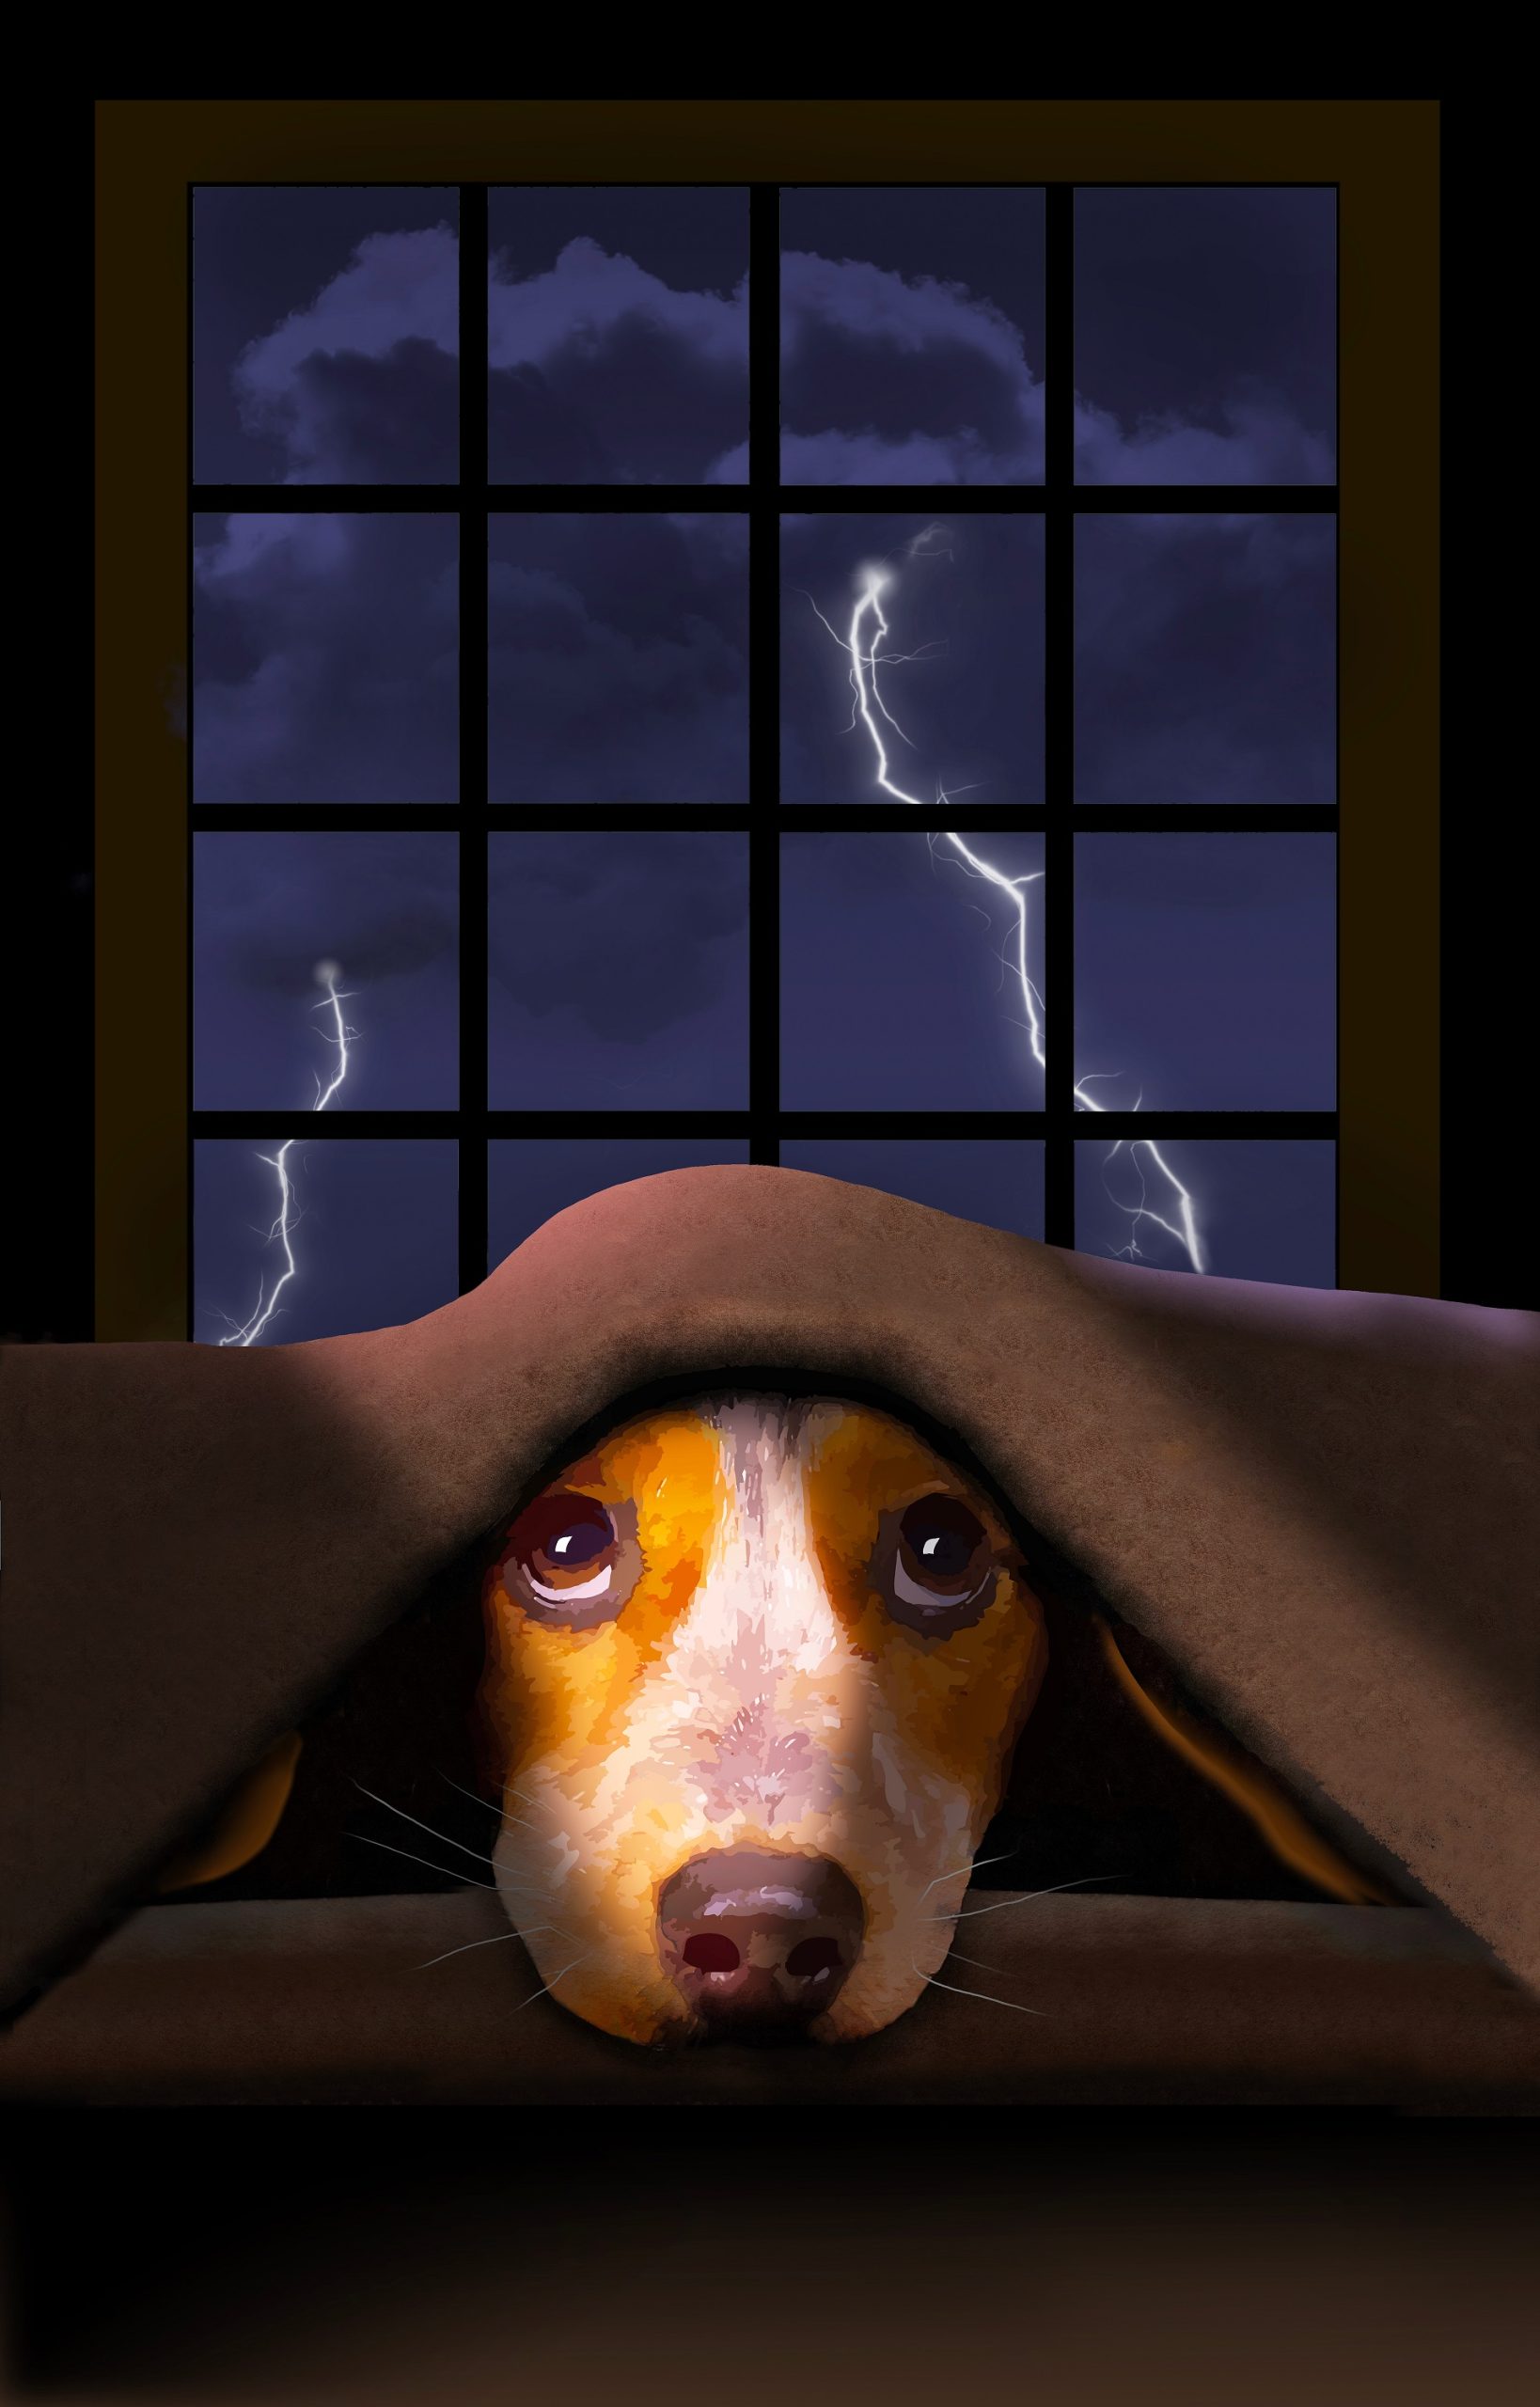 are dogs scared of lightning